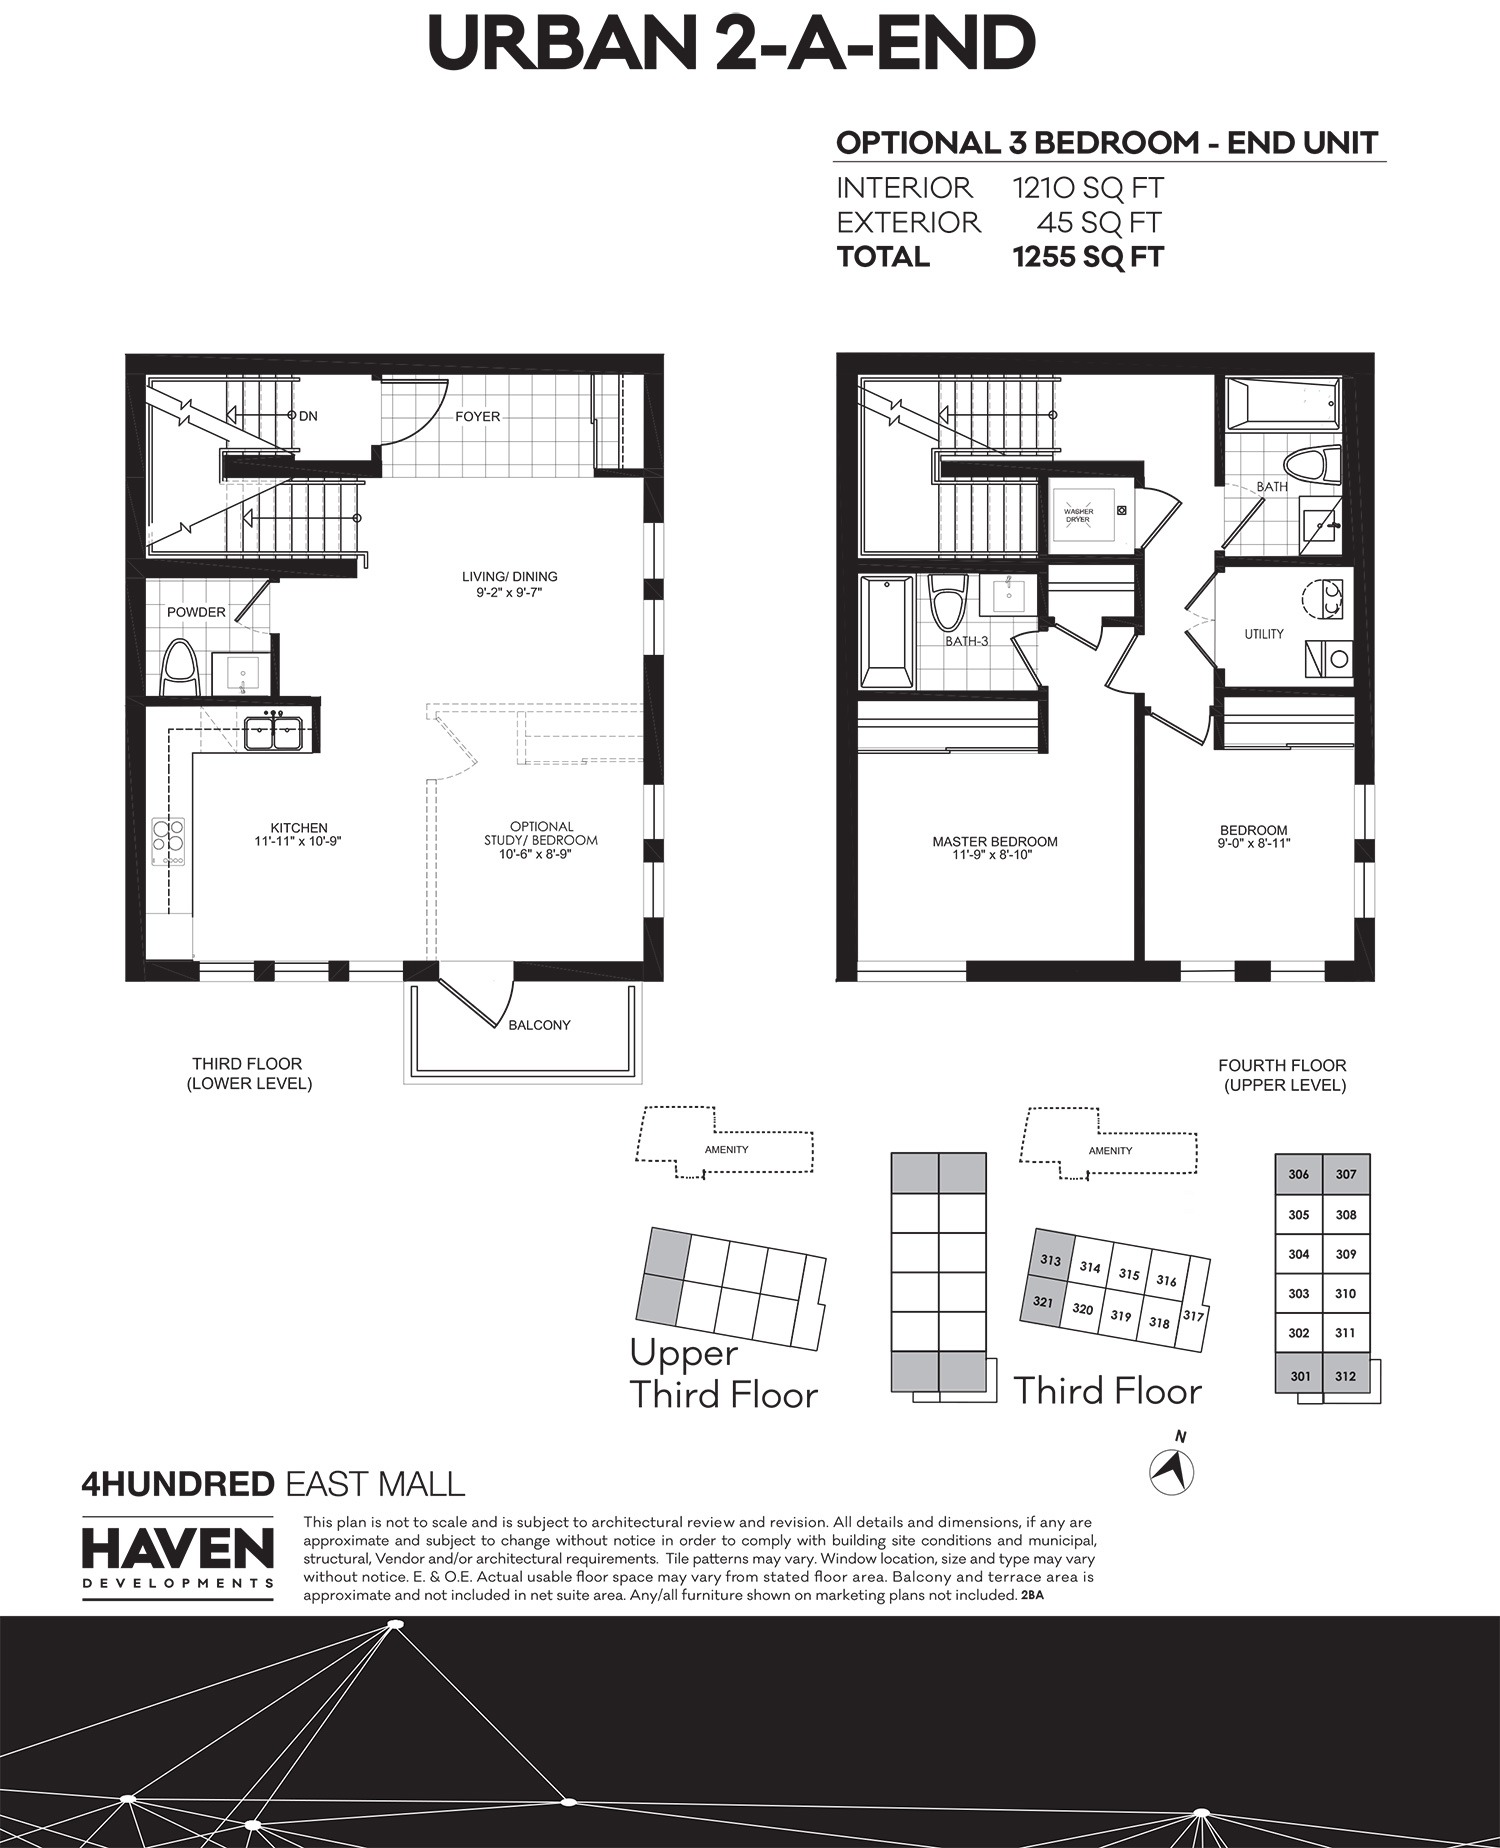  Floor Plan of 4HUNDRED EAST MALL Urban Townhomes with undefined beds